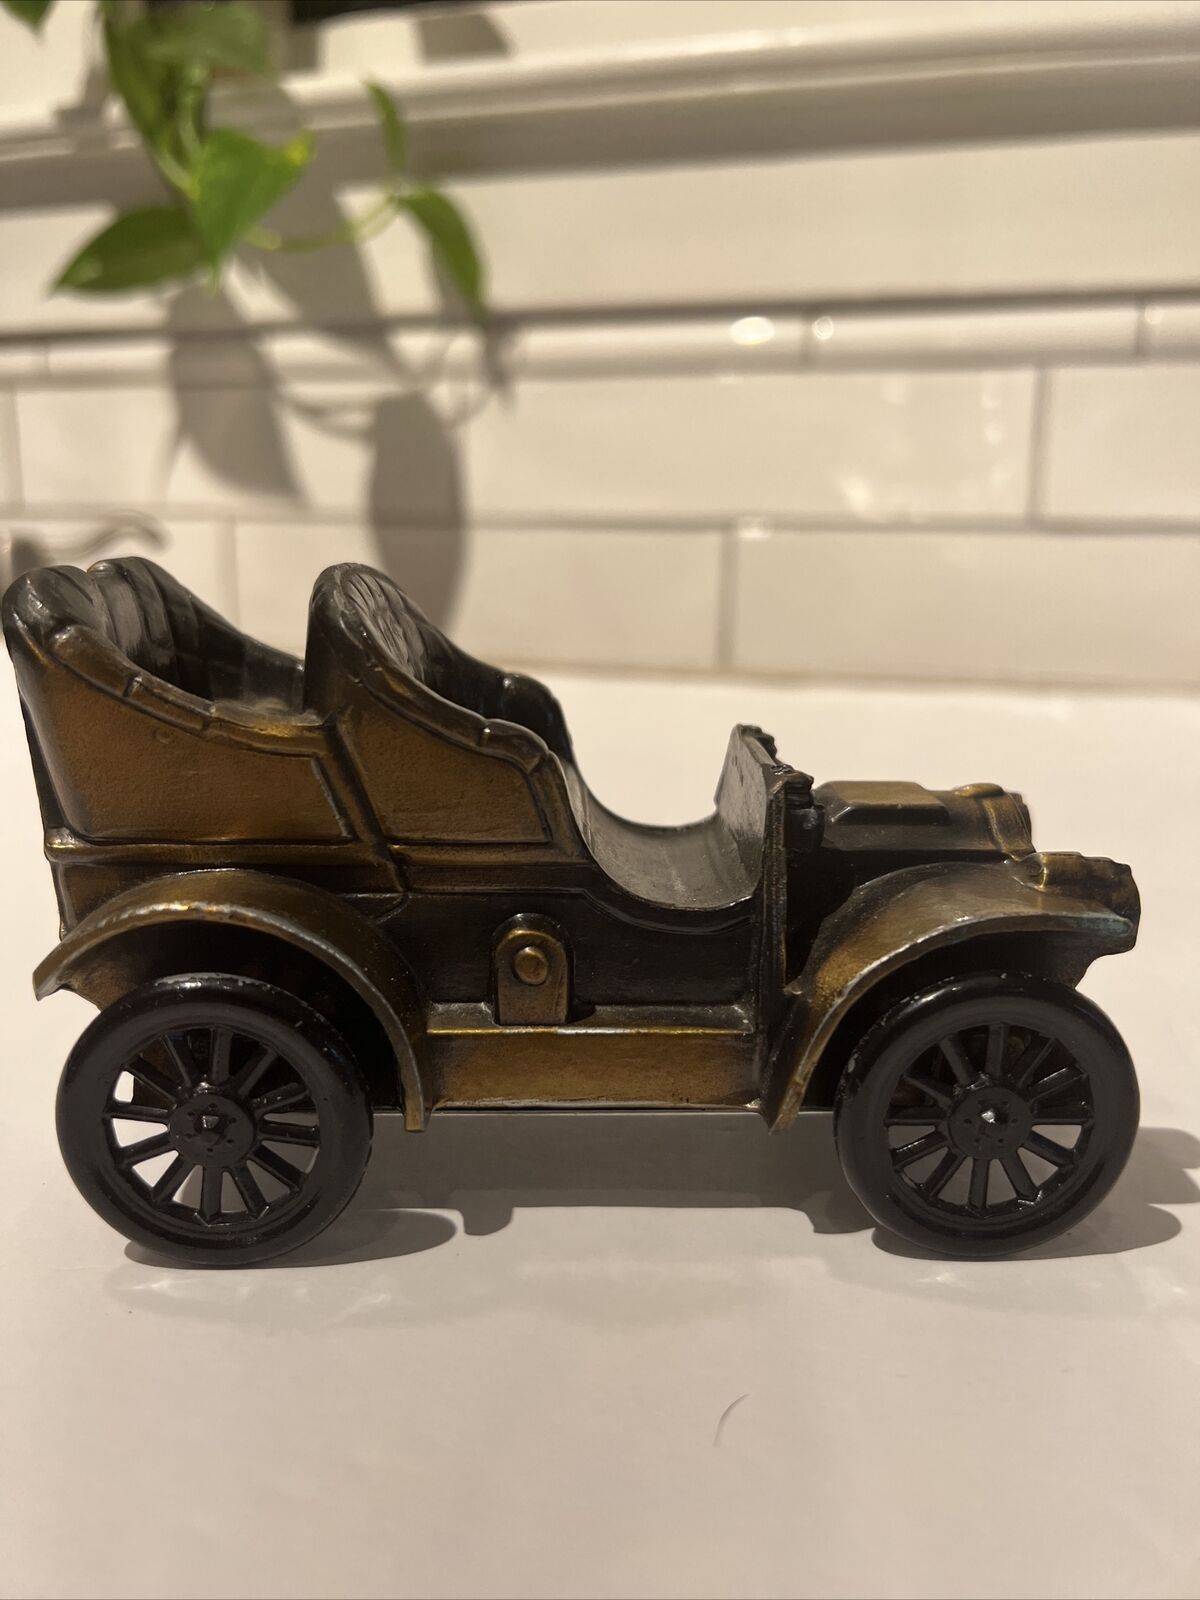 1906 OLDSMOBILE Heavy Metal Car Coin Bank BY BANTHRICO Chicago, USA Vintage